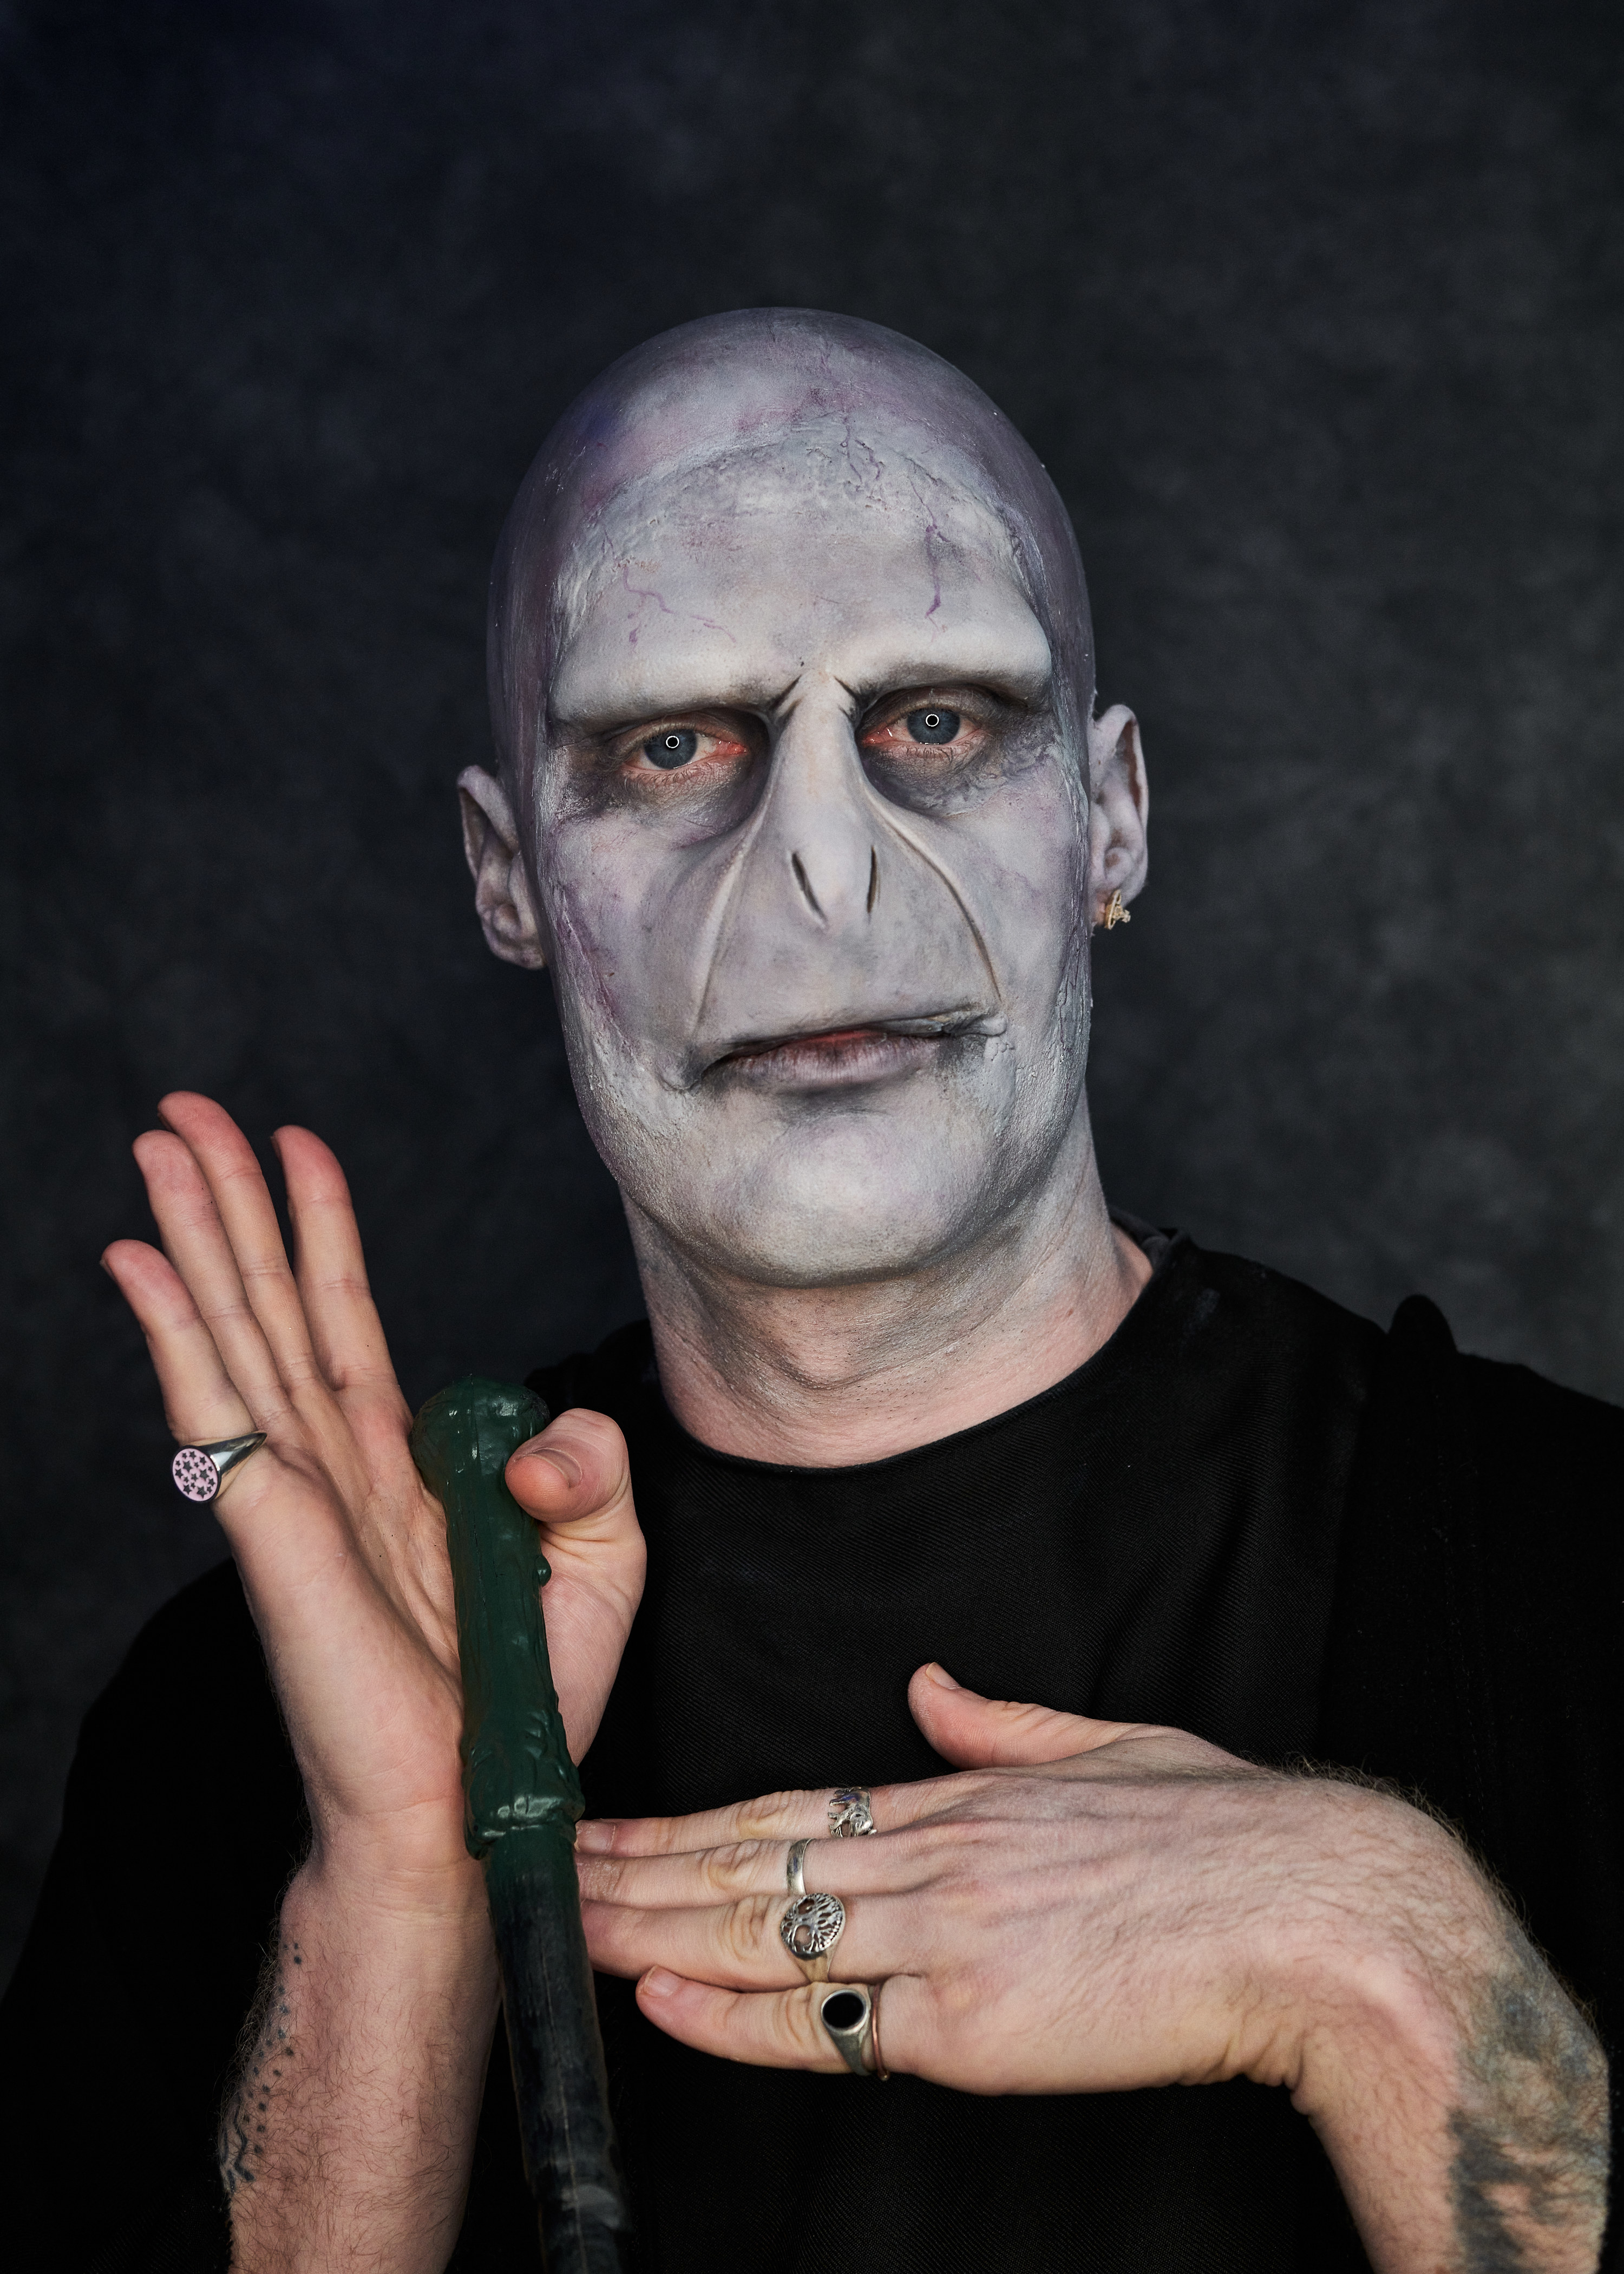 A man dressed as Lord Voldemort